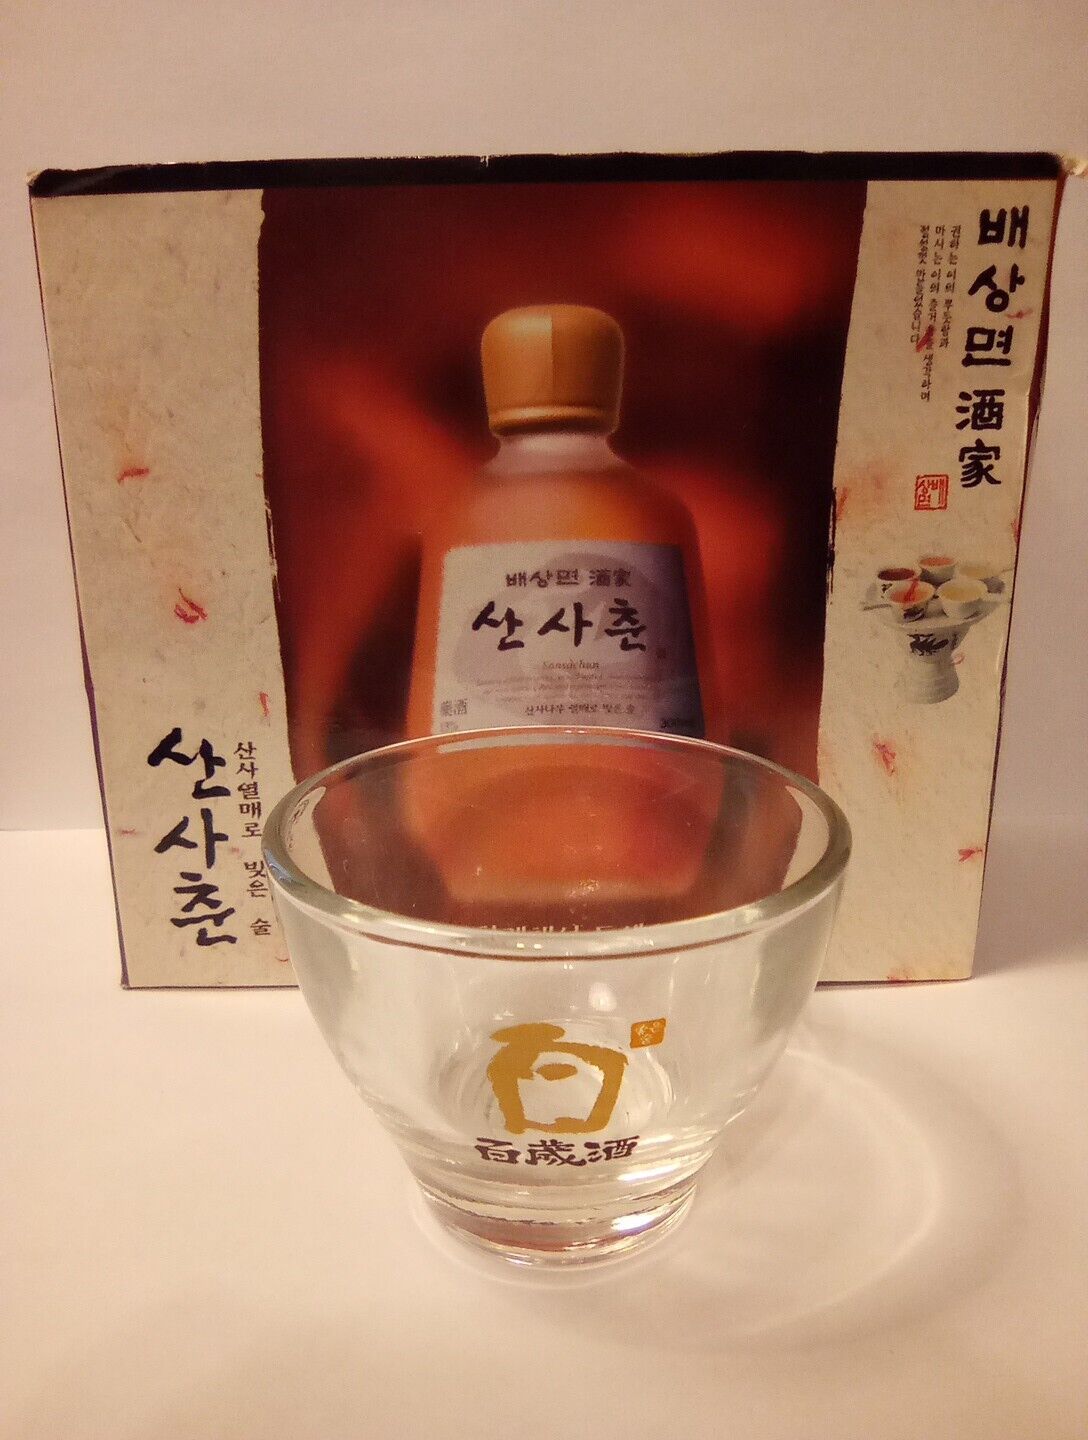 WONDERFUL CHINESE CHARACTER LOGO SHOT GLASS GREAT FOR ANY COLLECTION # 1.